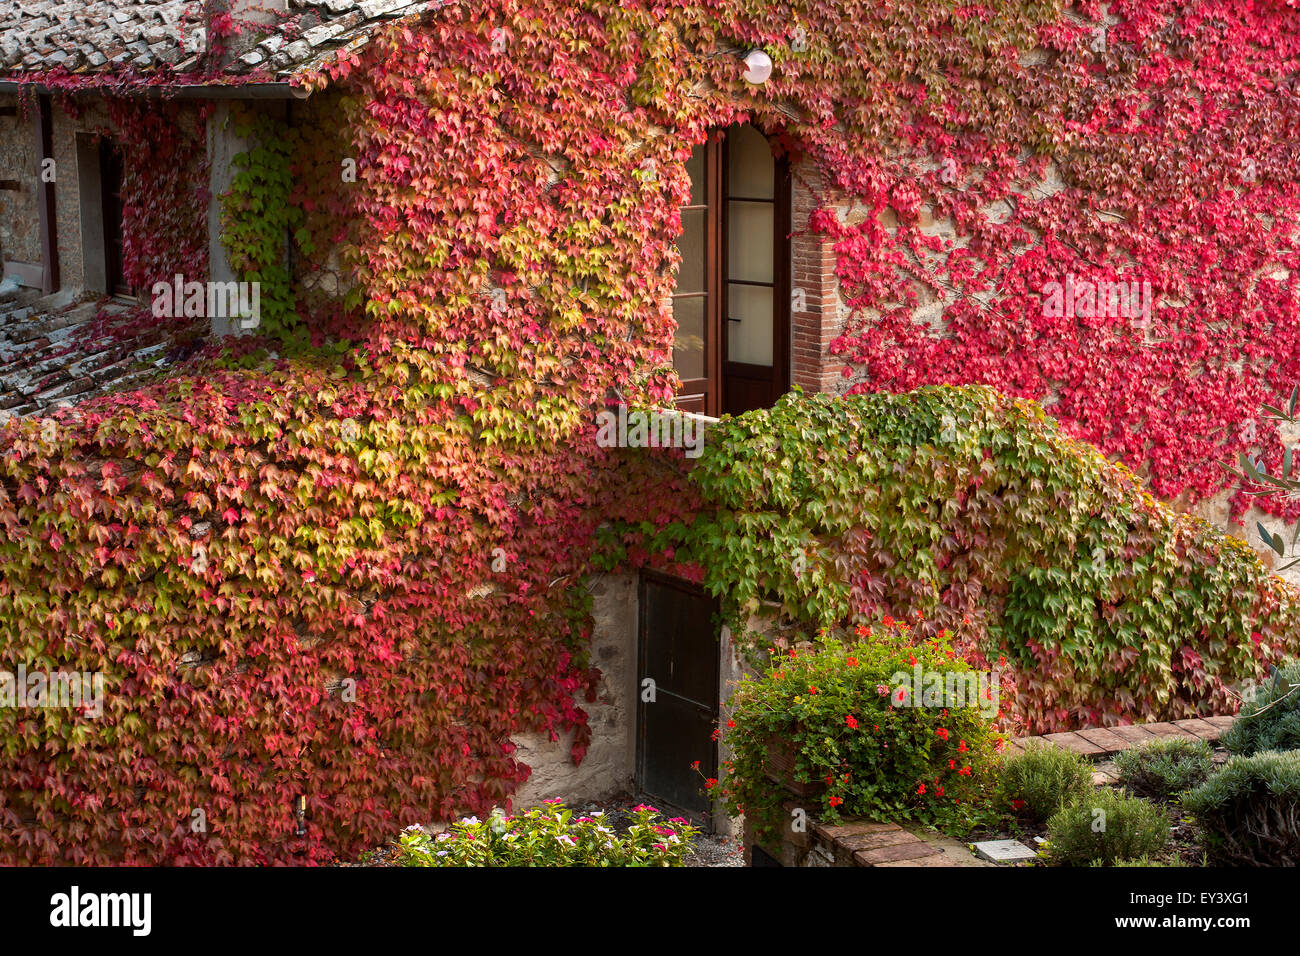 Colourful ivy growing on the wall of an old house or villa. Stock Photo